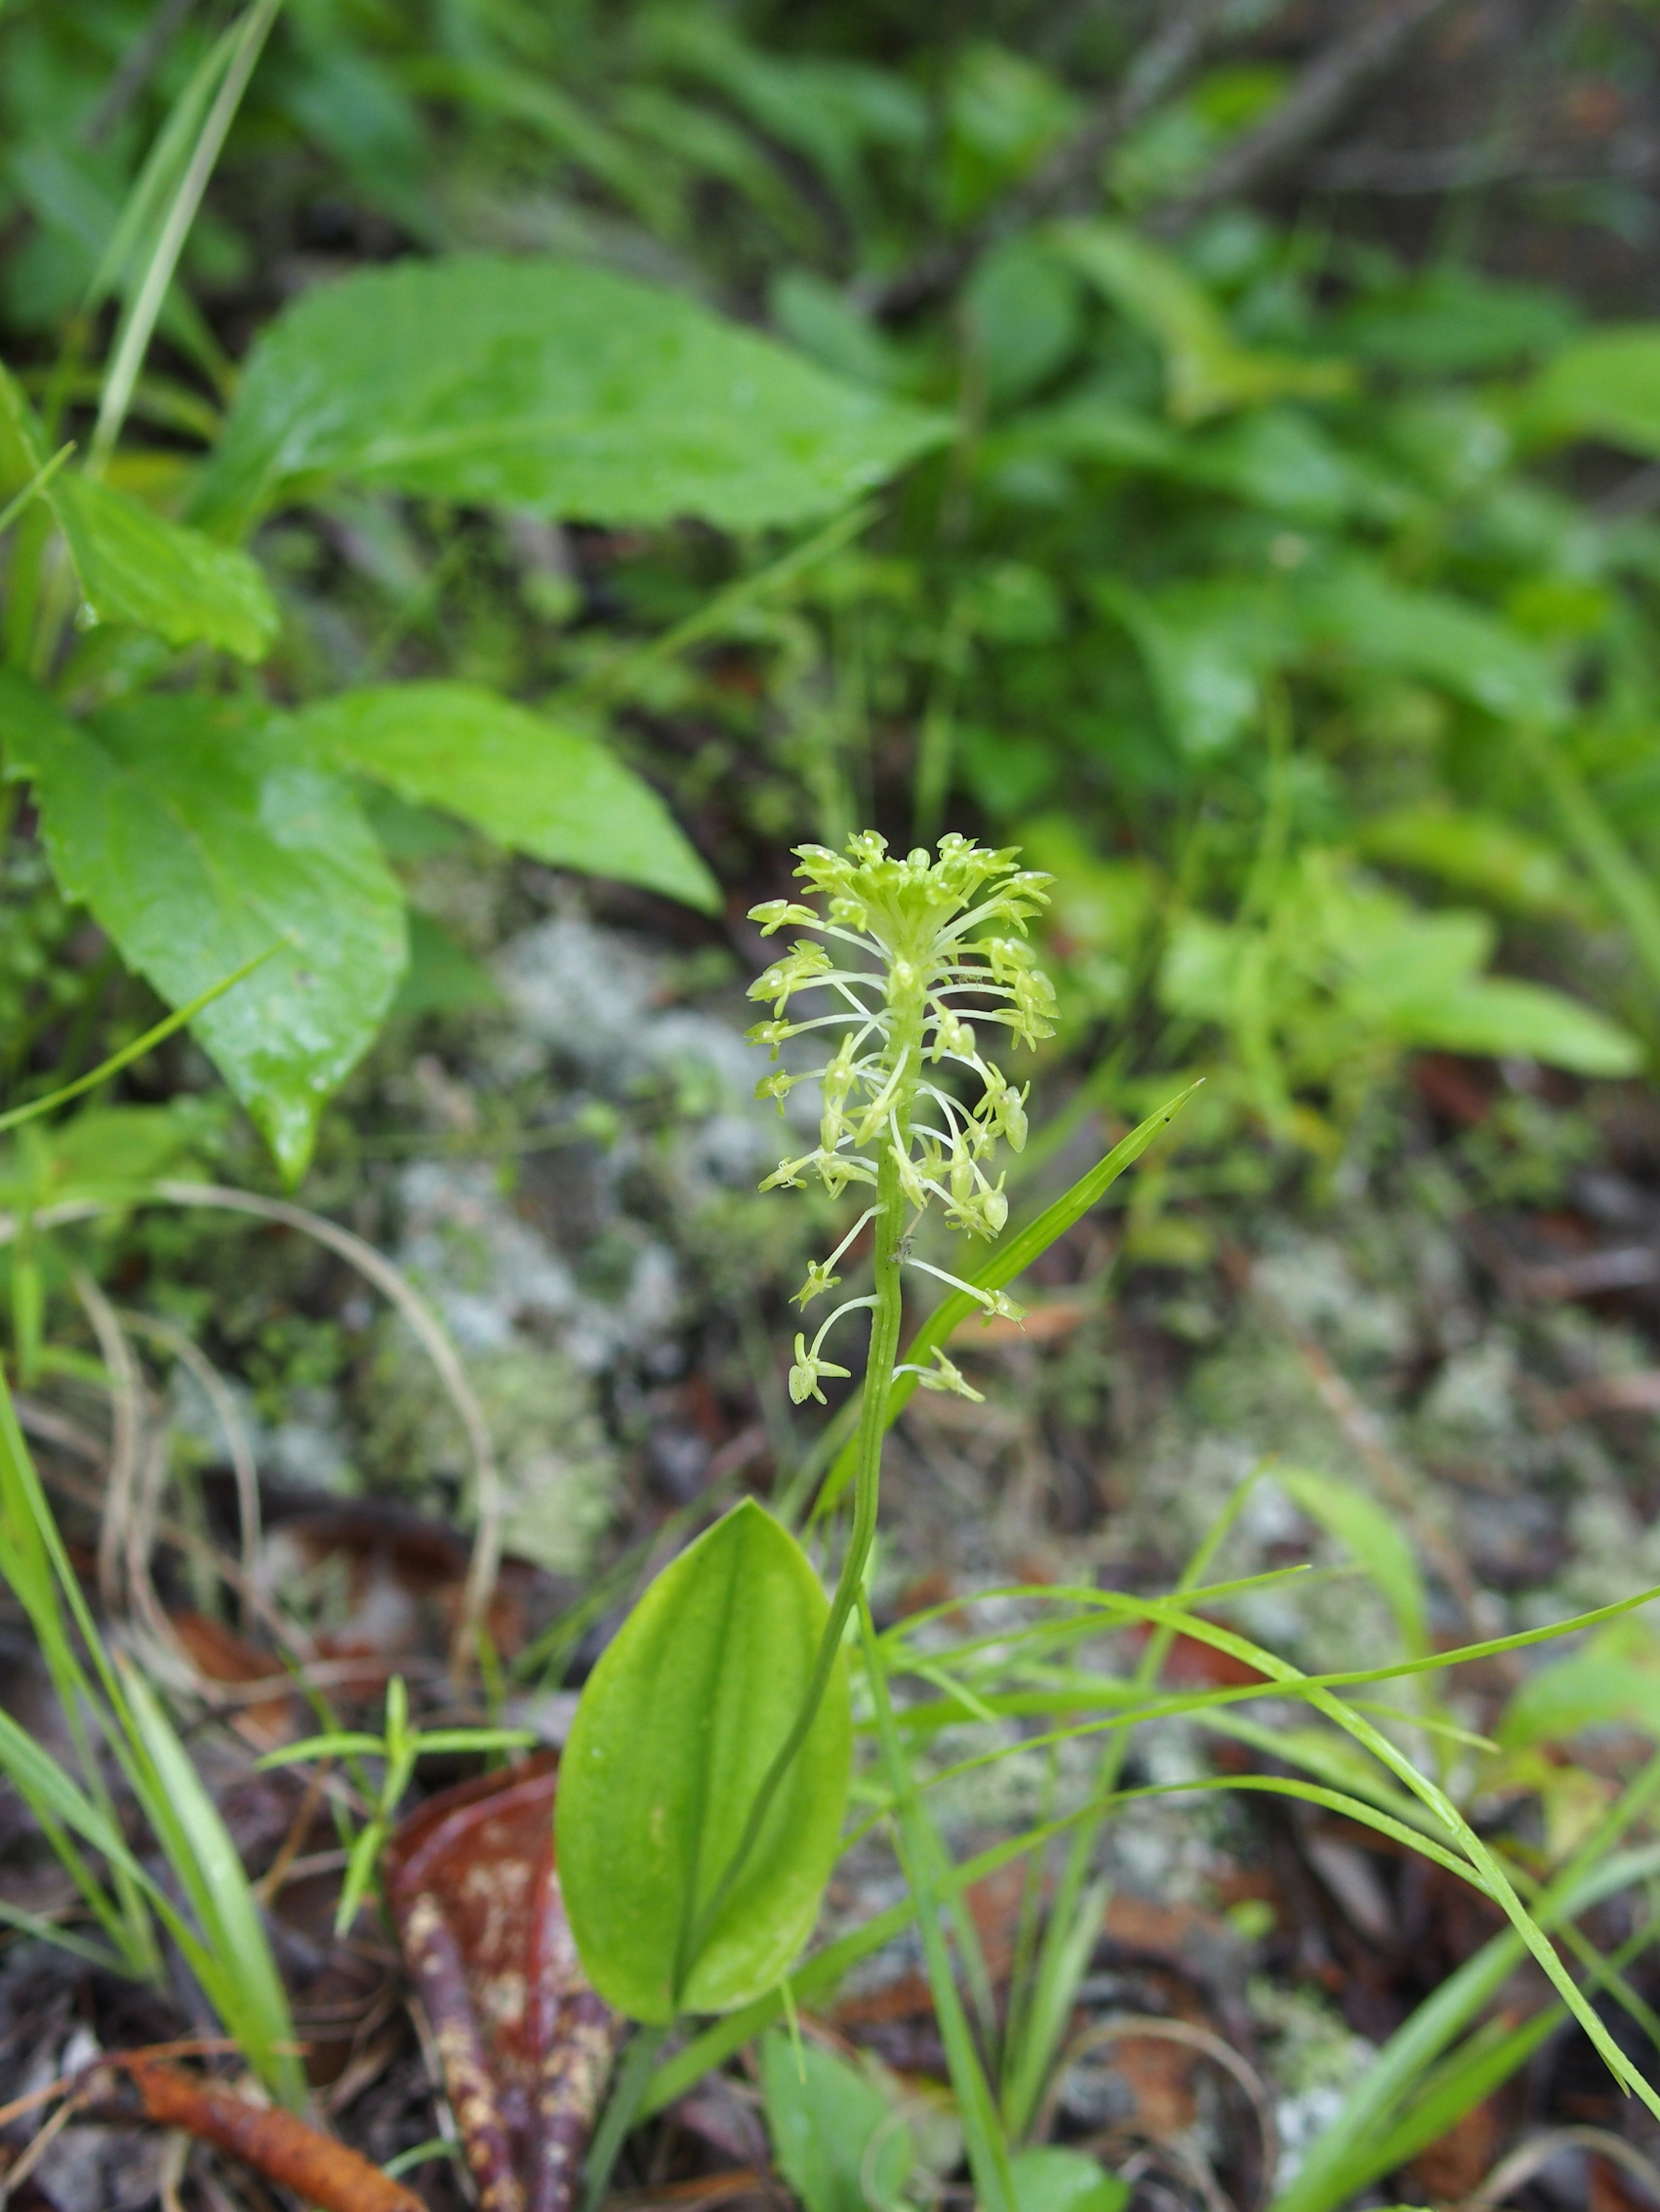 The Scientific Name is Malaxis bayardii. You will likely hear them called Appalachian Adder's-mouth, Bayard's Adder's-mouth Orchid. This picture shows the Growing in moist acidic soil along Ivestor Gap Trail. of Malaxis bayardii